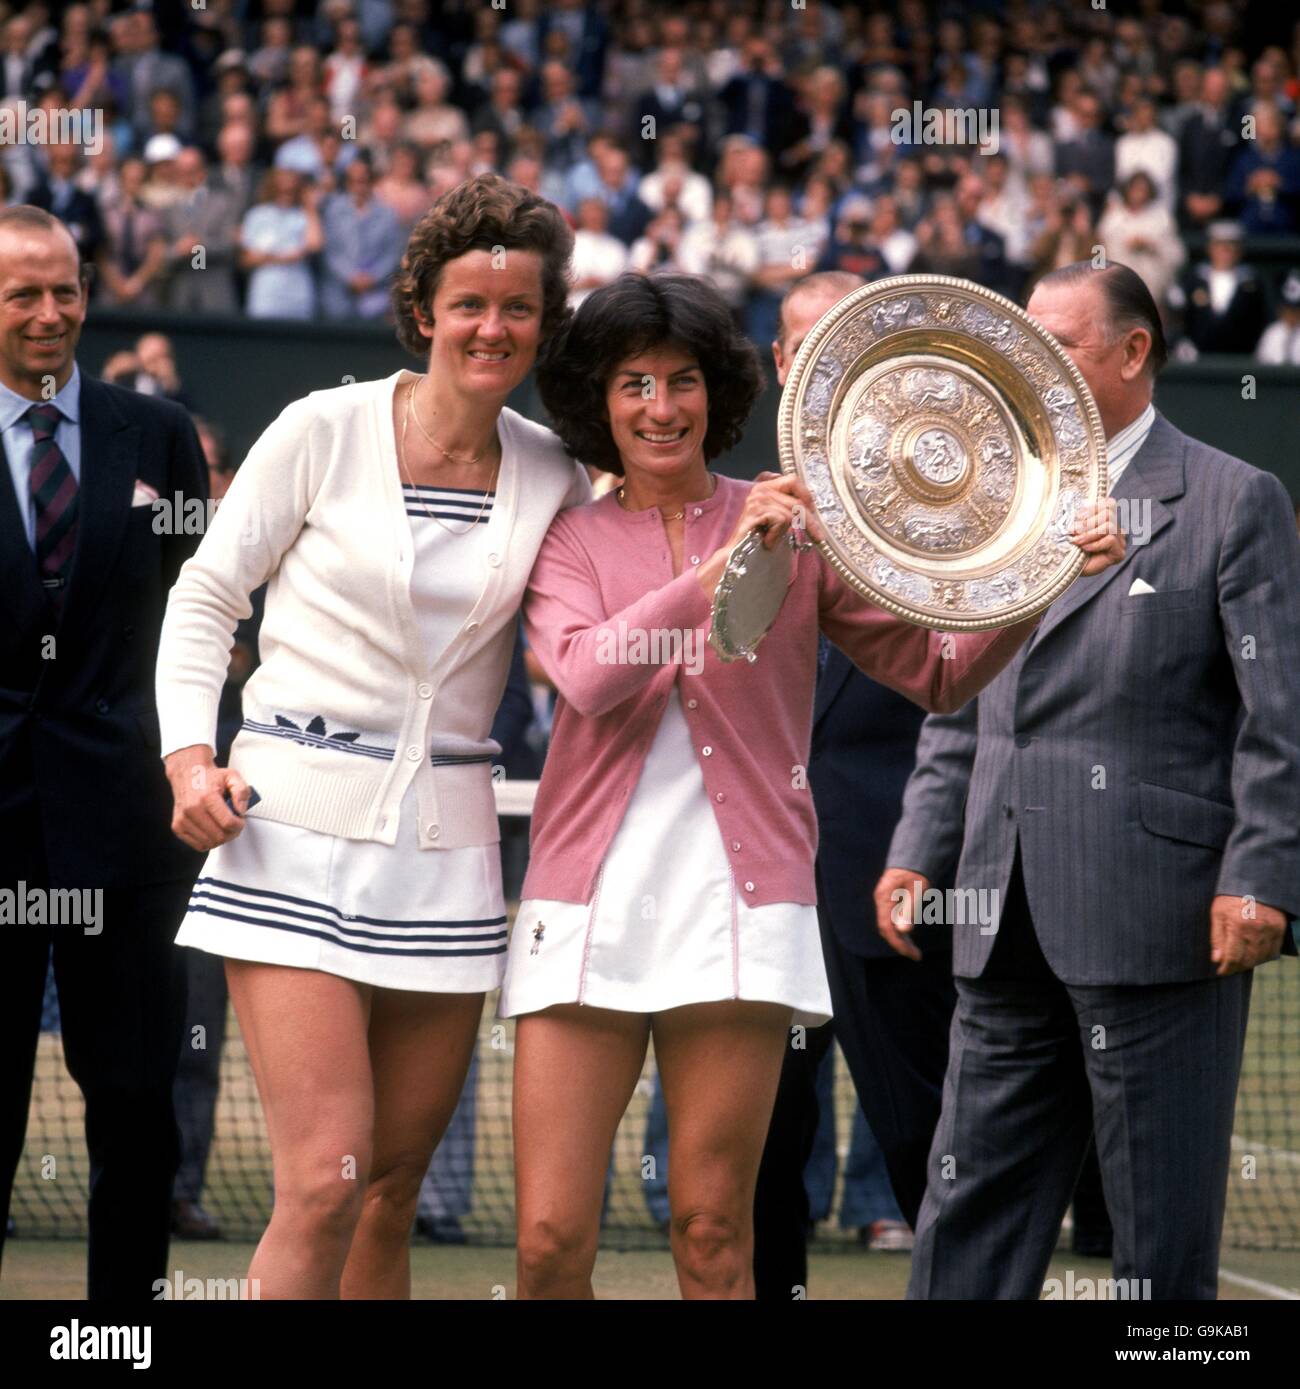 Tennis - Wimbledon Championships - Ladies' Singles - Final - Virginia Wade v Betty Stove. Virginia Wade (r) celebrates with the Ladies' Singles trophy after beating Betty Stove (l) in the final Stock Photo